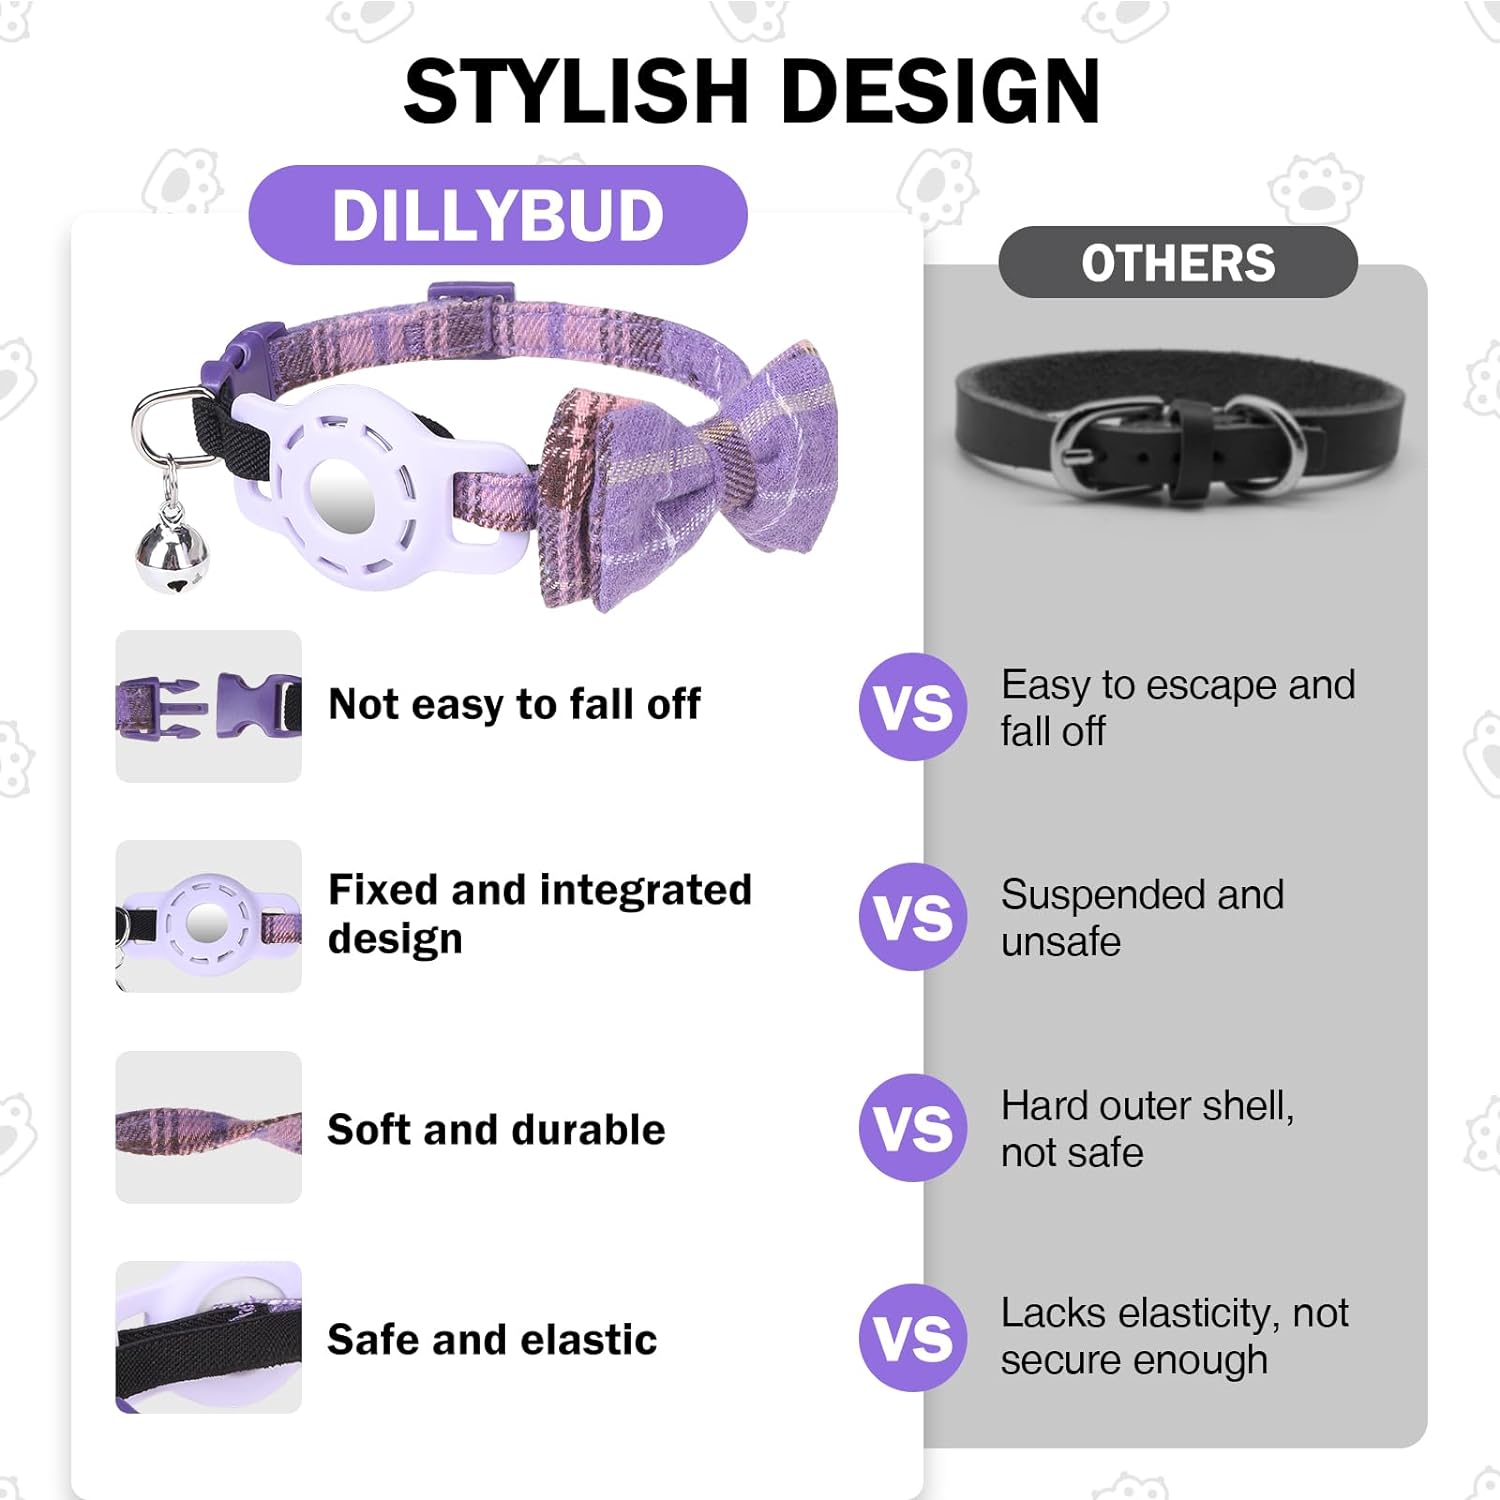 DILLYBUD Airtag Cat Collar, Plaid Cat Collar with Bow Tie and Bell, Adjustable Breakaway Pet Collar for Puppy Kitten Girl and Boys, GPS Tracker Cat Collars, Purple